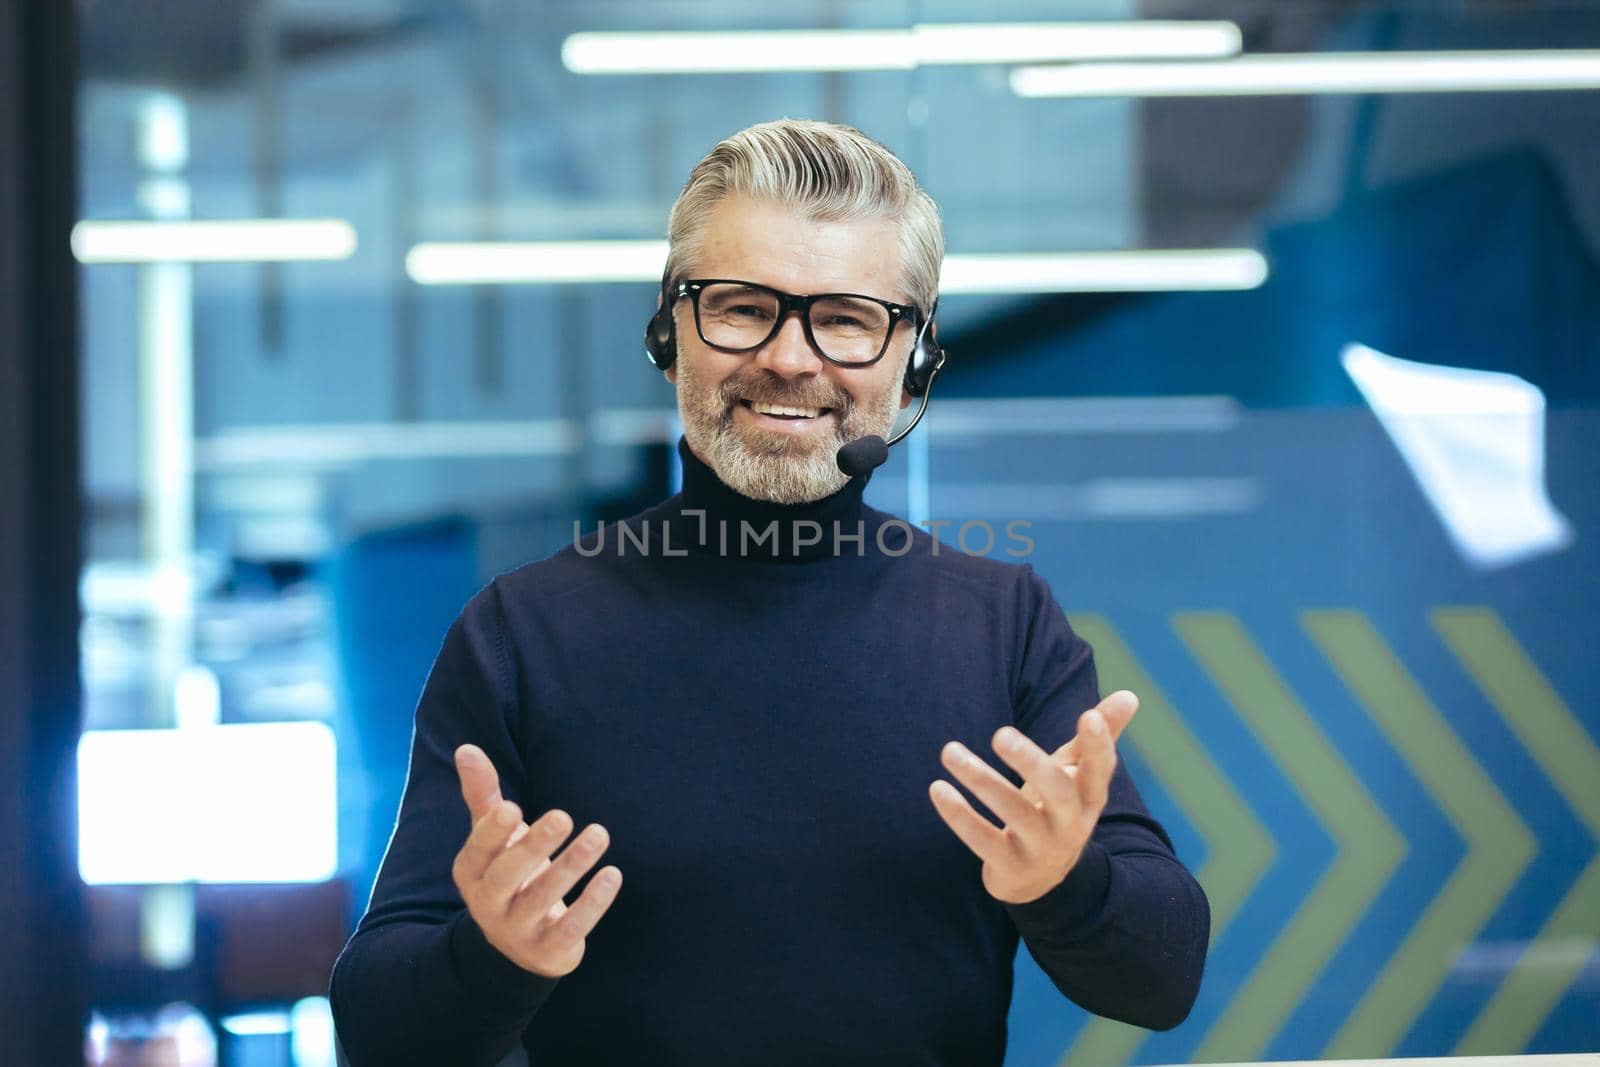 Online business training. A young handsome gray-haired man in headphones with a microphone conducts an online meeting, webinar on camera. He waves his hands, smiles.